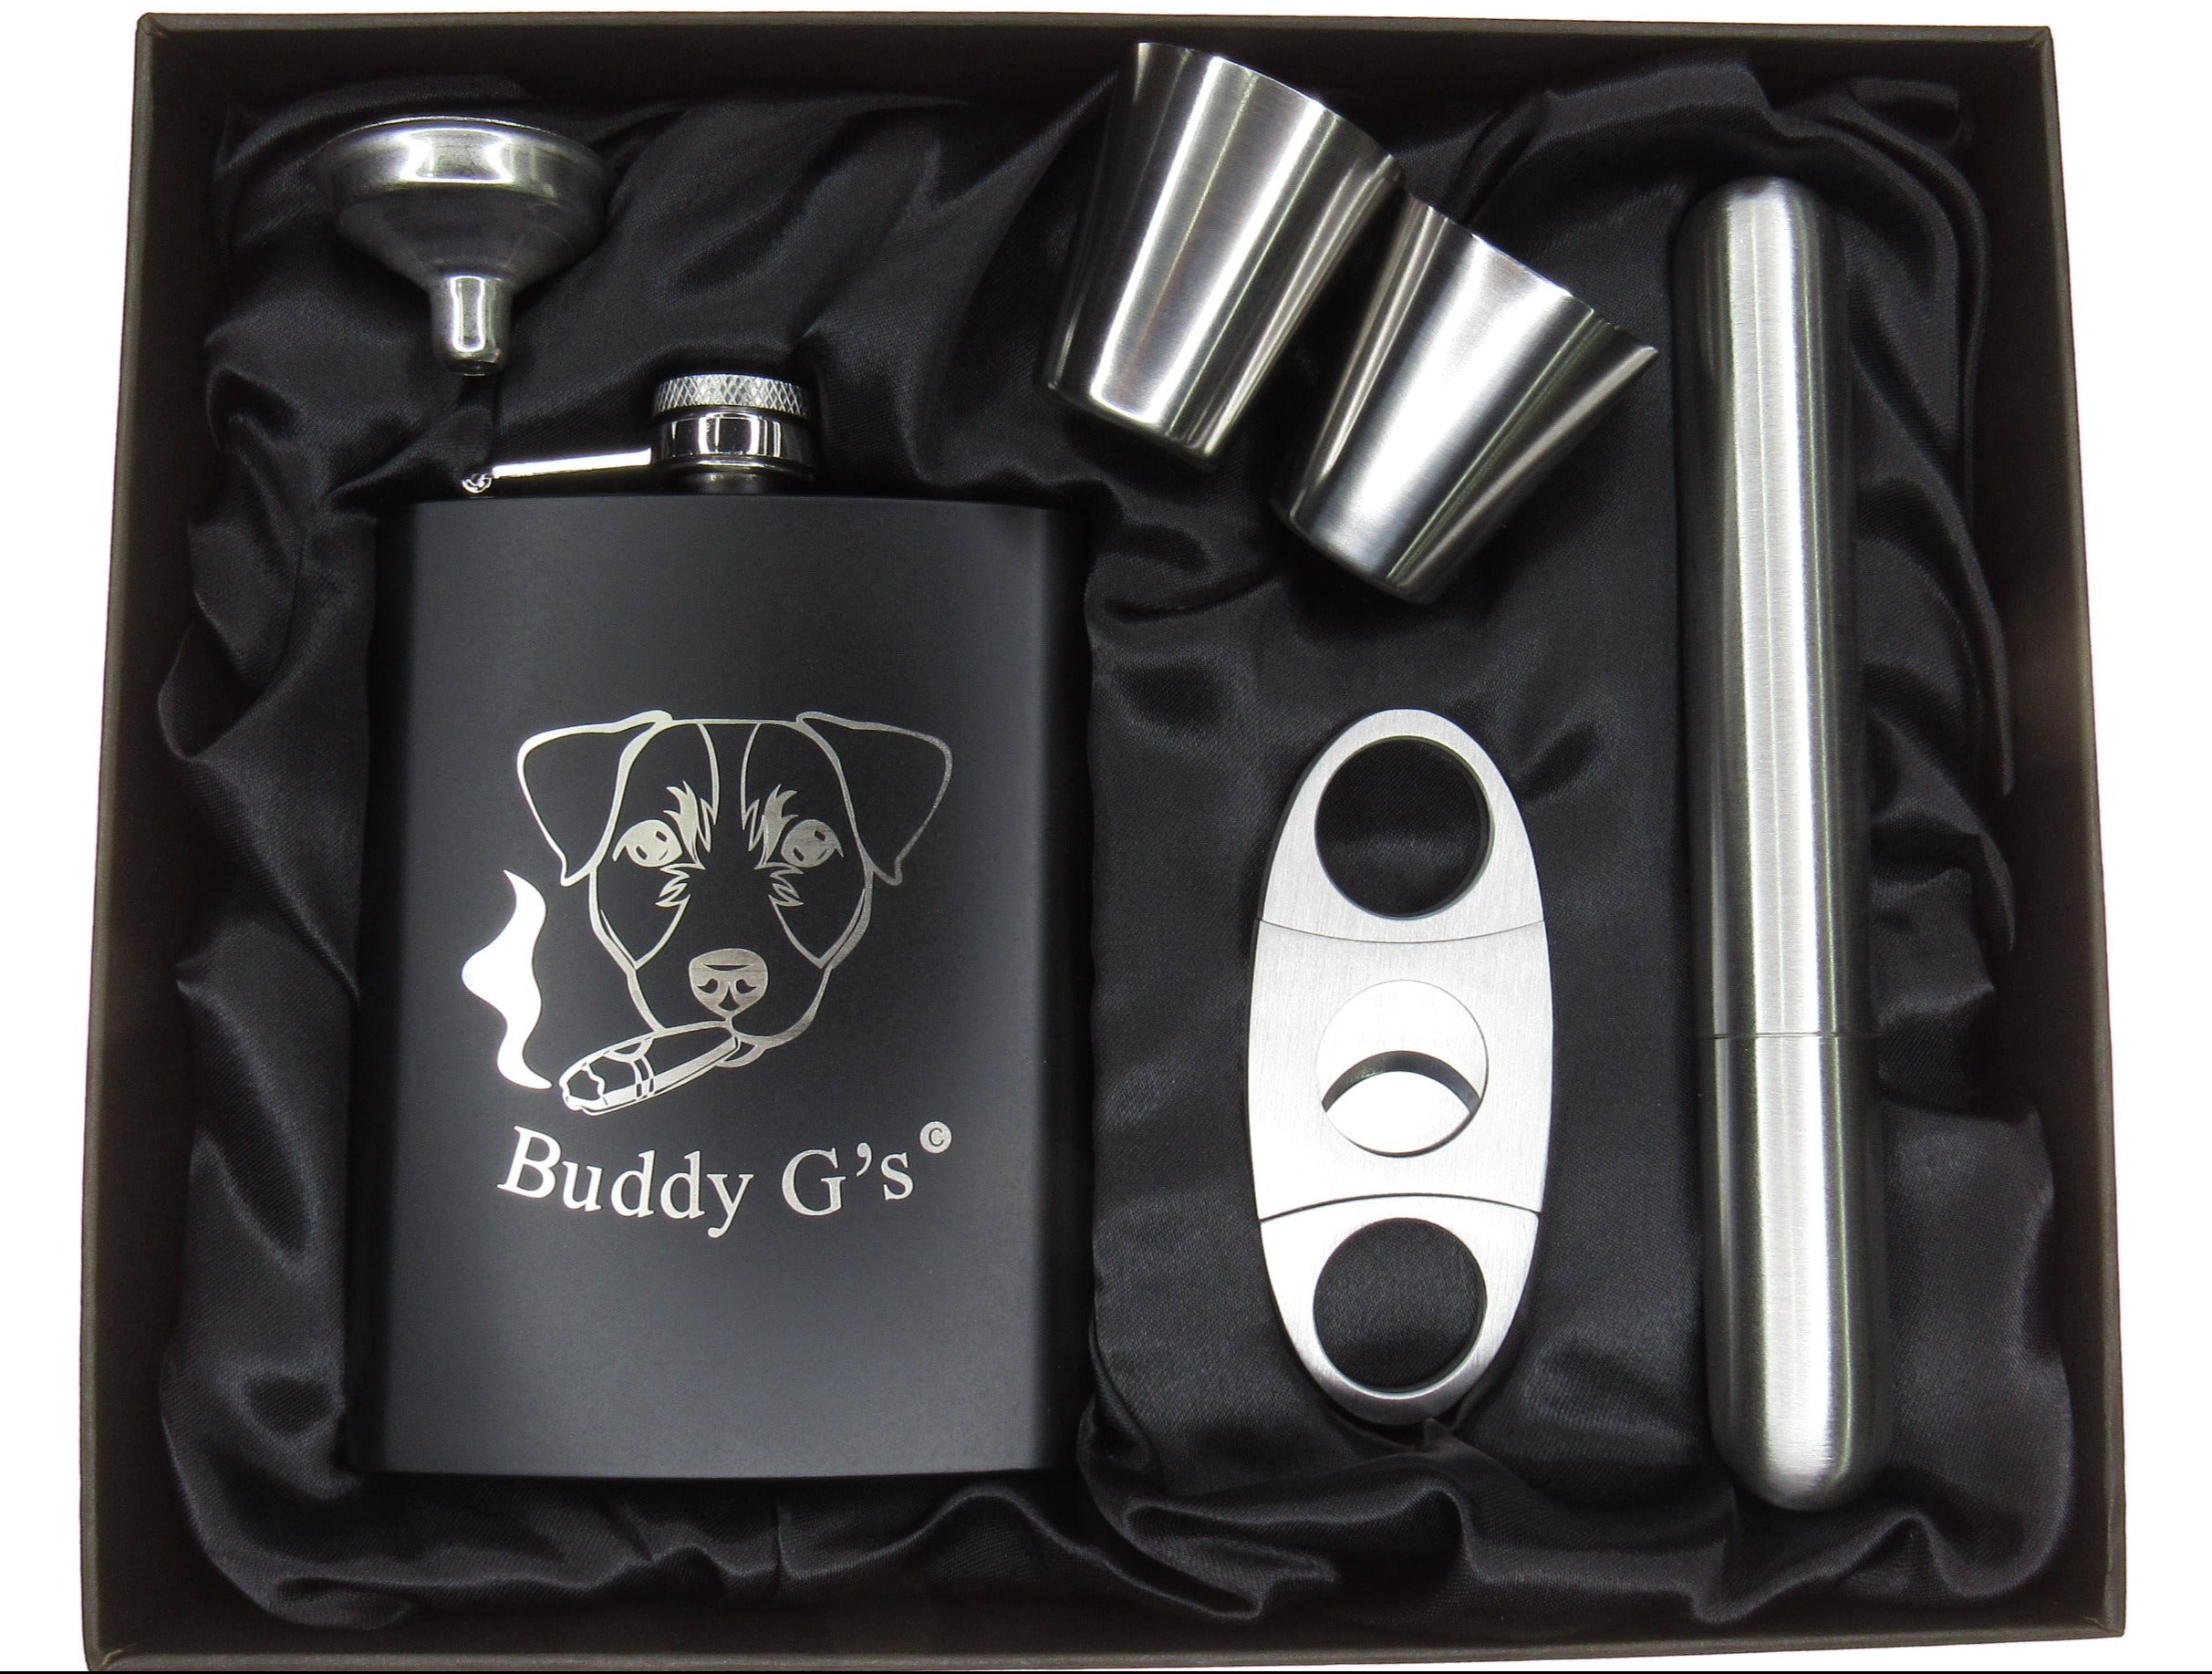 Whisky Hip Flask Set - 8 oz. Stainless Steel Flask Finished in Rich Matte Black 6 Piece Buddy G's Flask Gift Boxed Set with a Cigar Cutter, Cigar Tube, 2 Shots and a Funnel